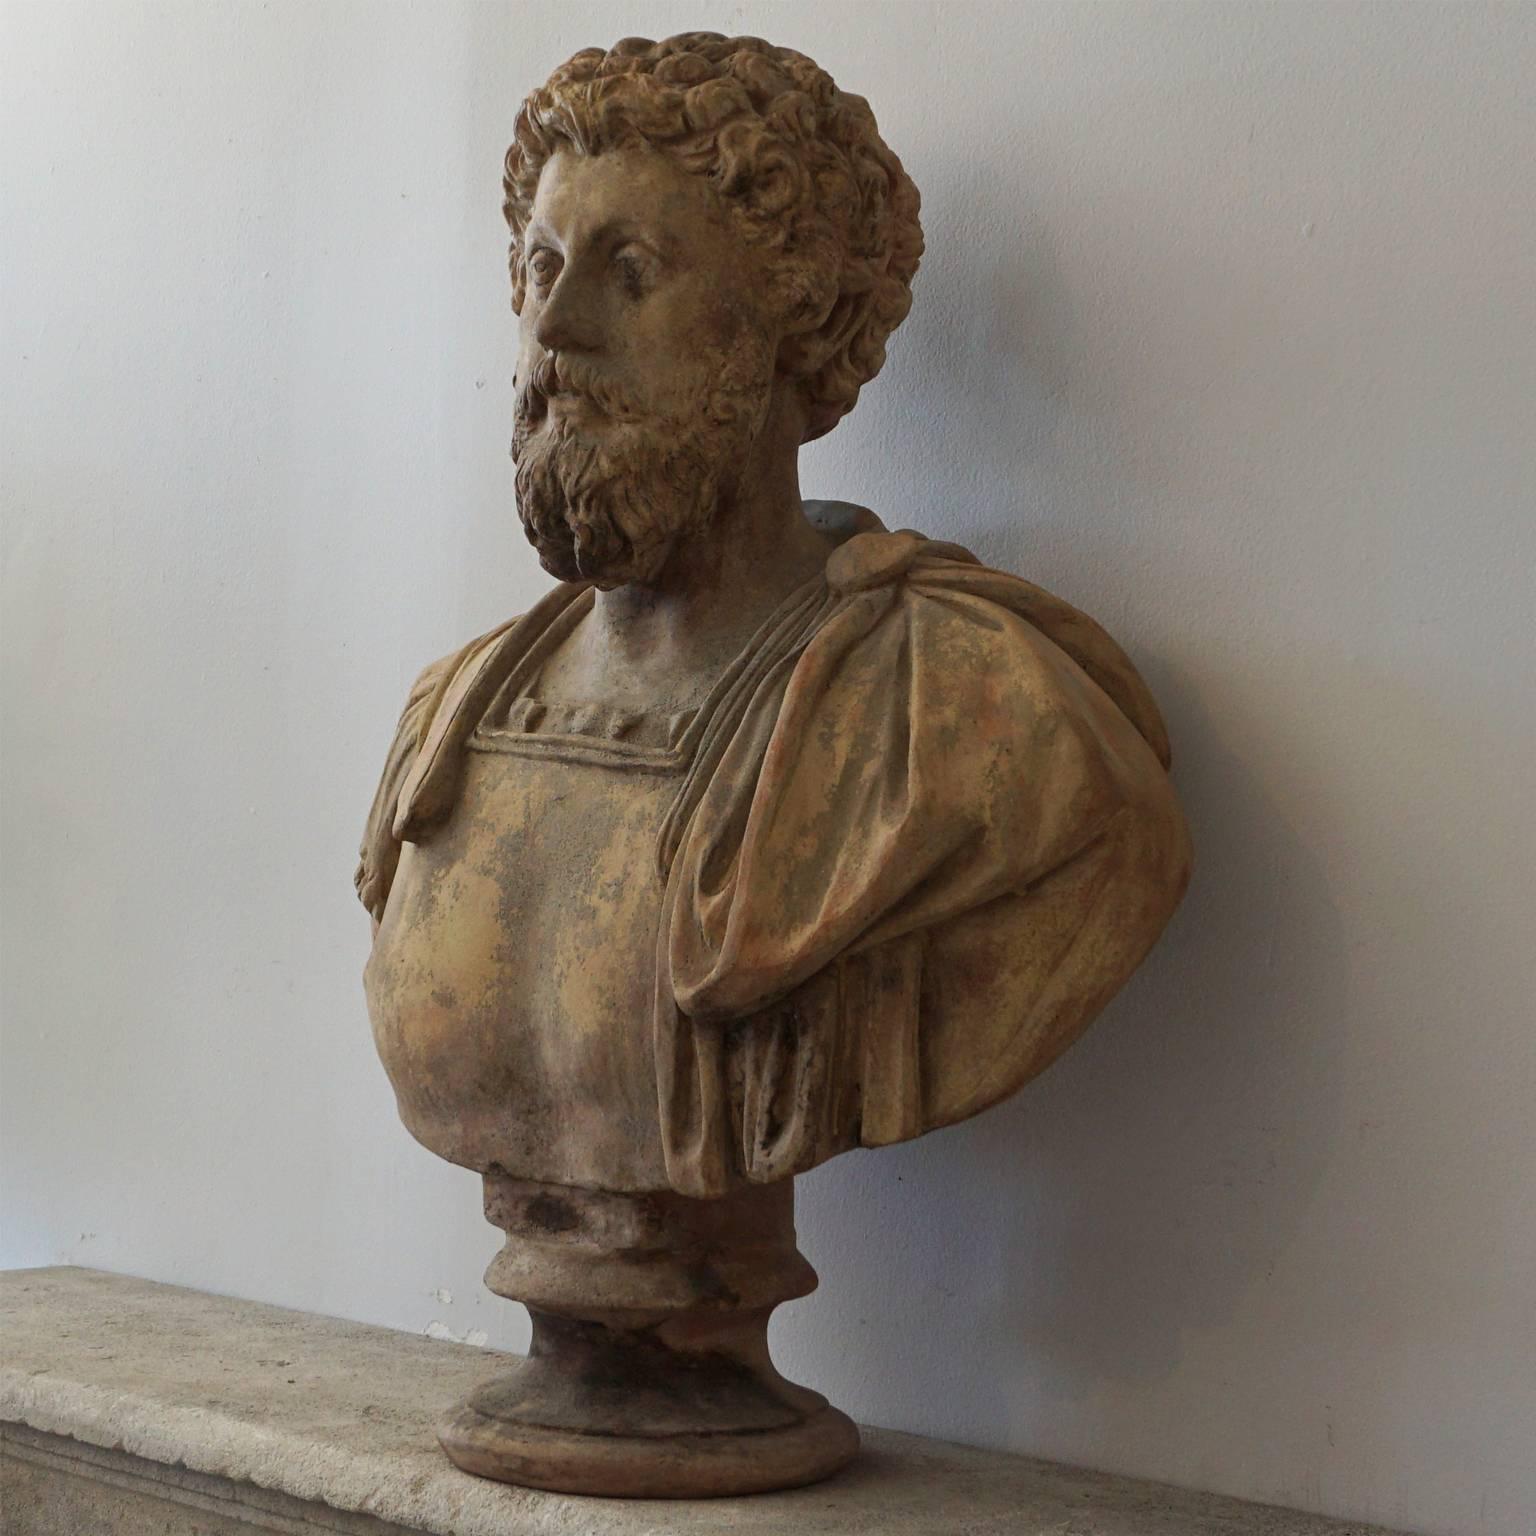 An antique Italian clay bust of the Italian emperor Marco Aurelio made of hand crafted Terra Cotta, raised on a round short base with an aged surface, in good condition. Wear consistent with age and use, Circa 1890, Italy.